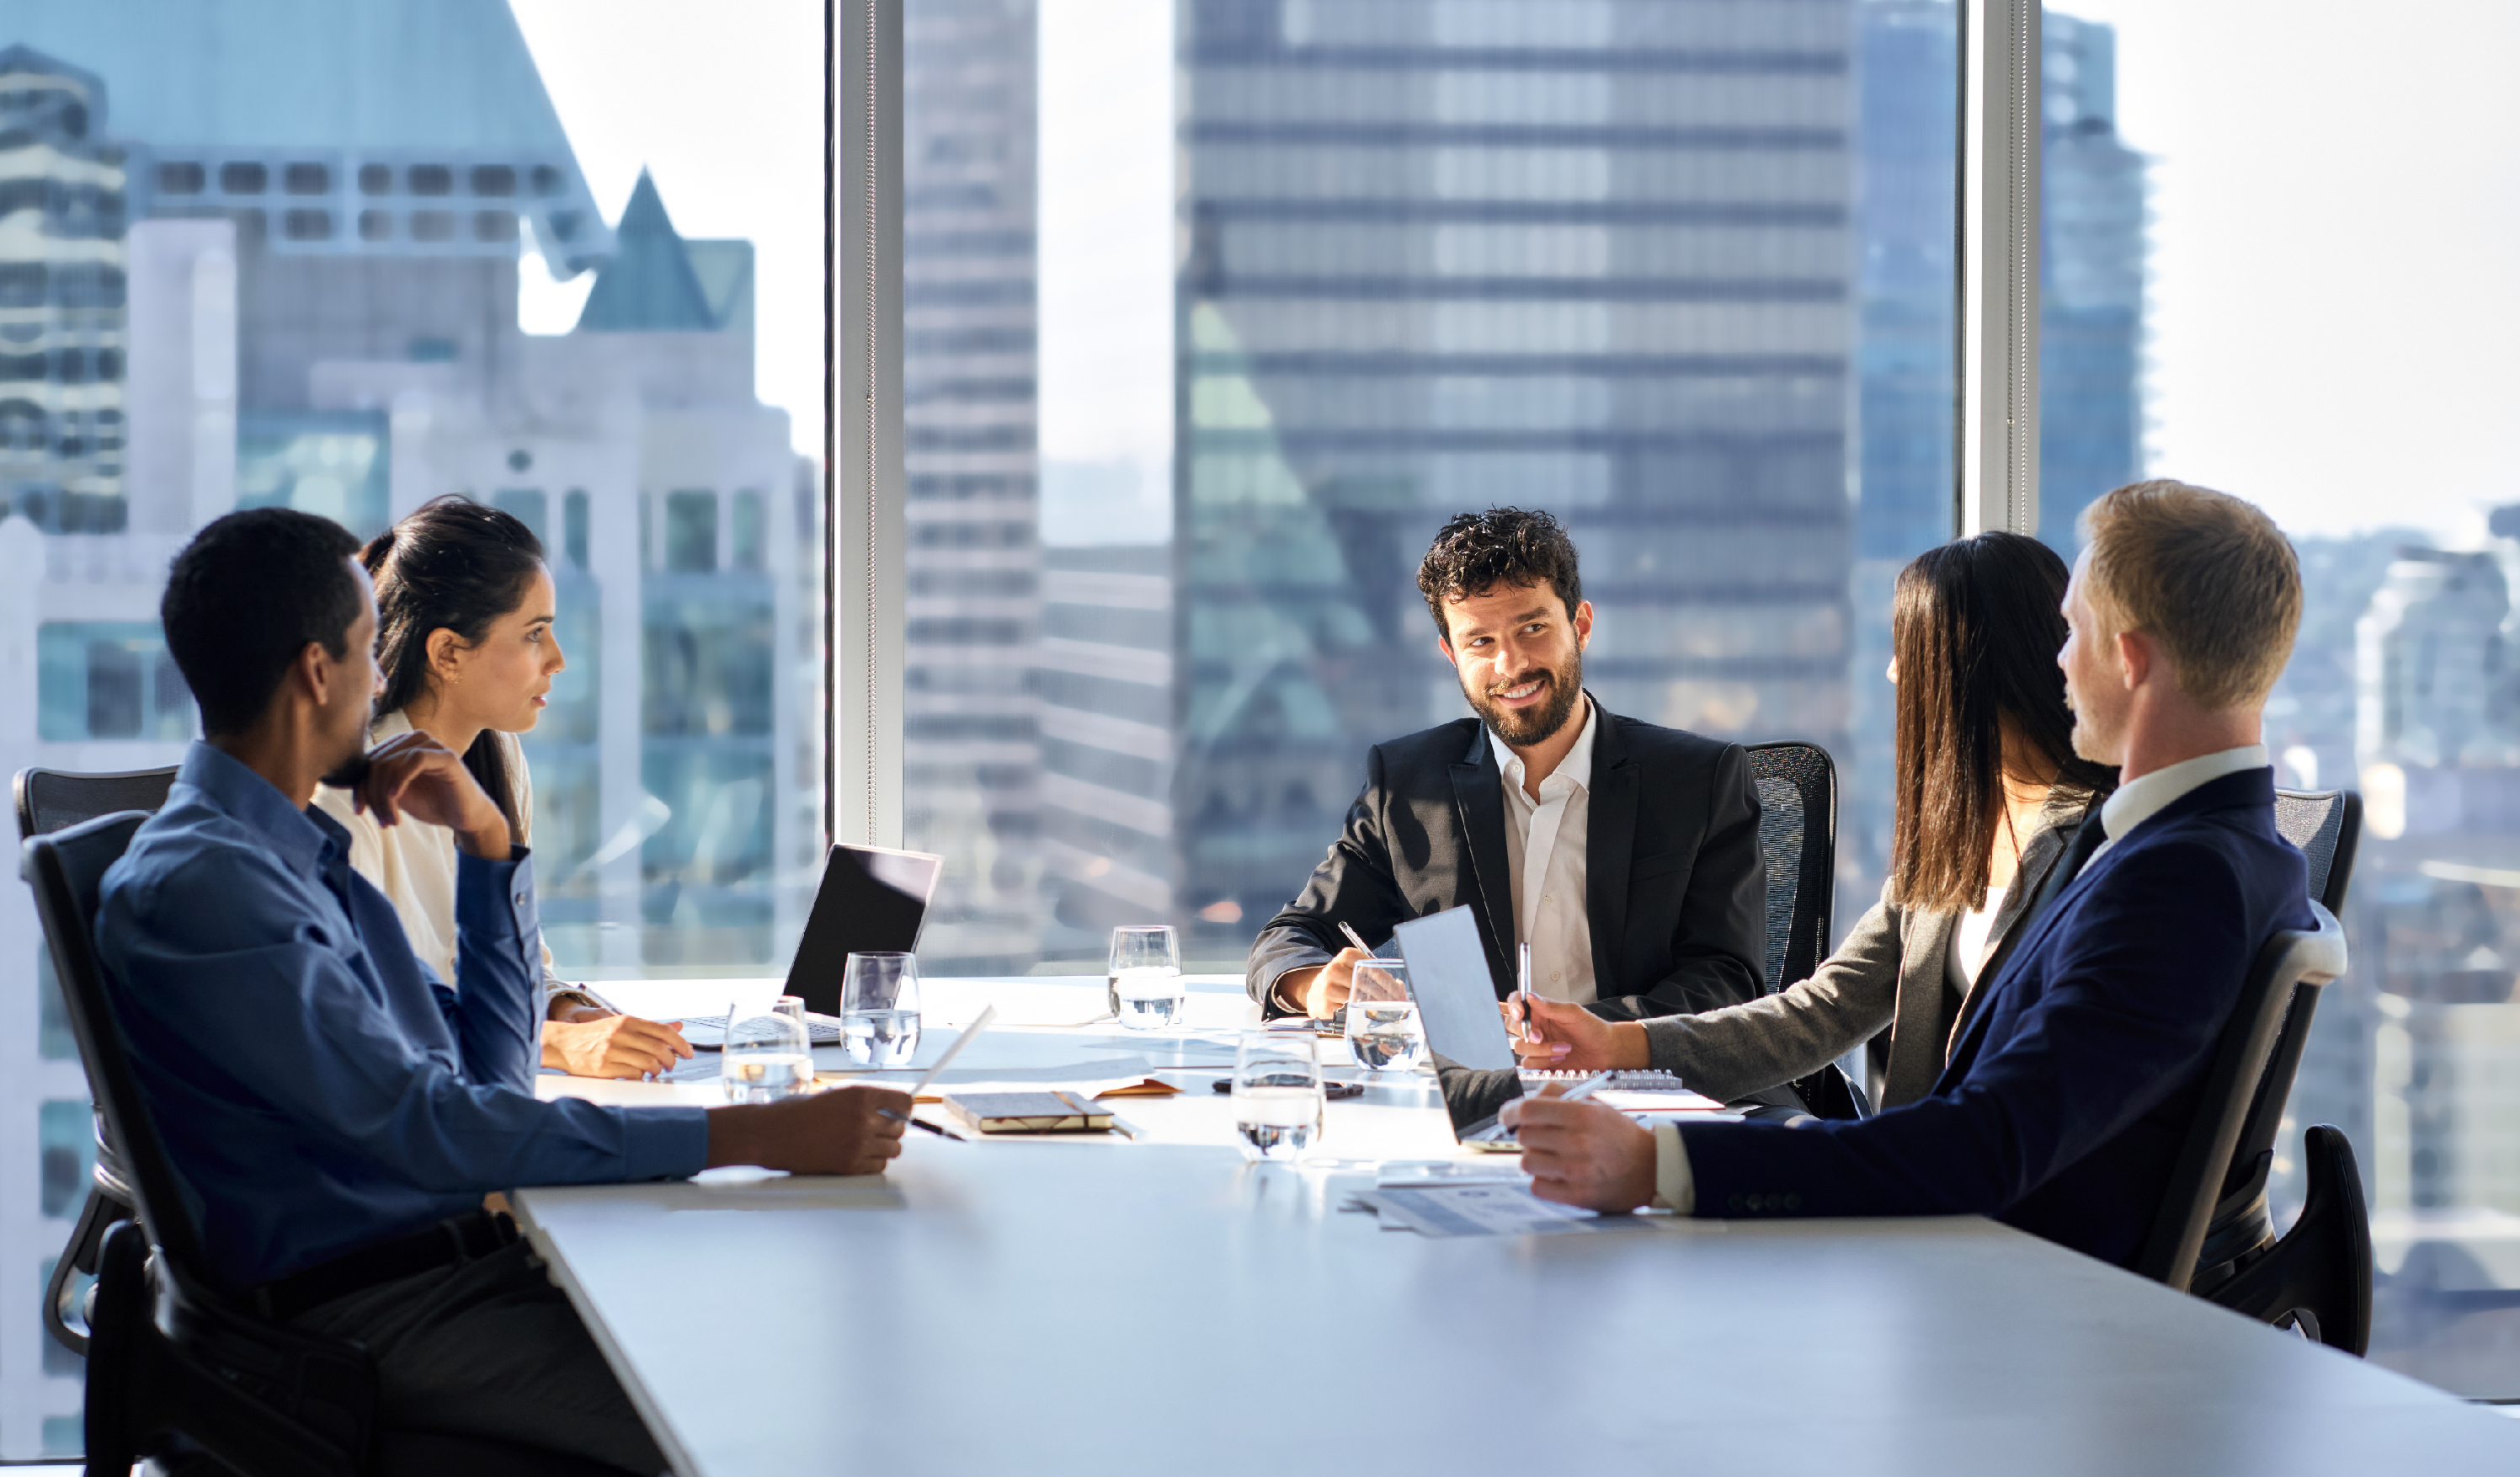 Areas to Consider at Your Next Quarterly Board Meeting